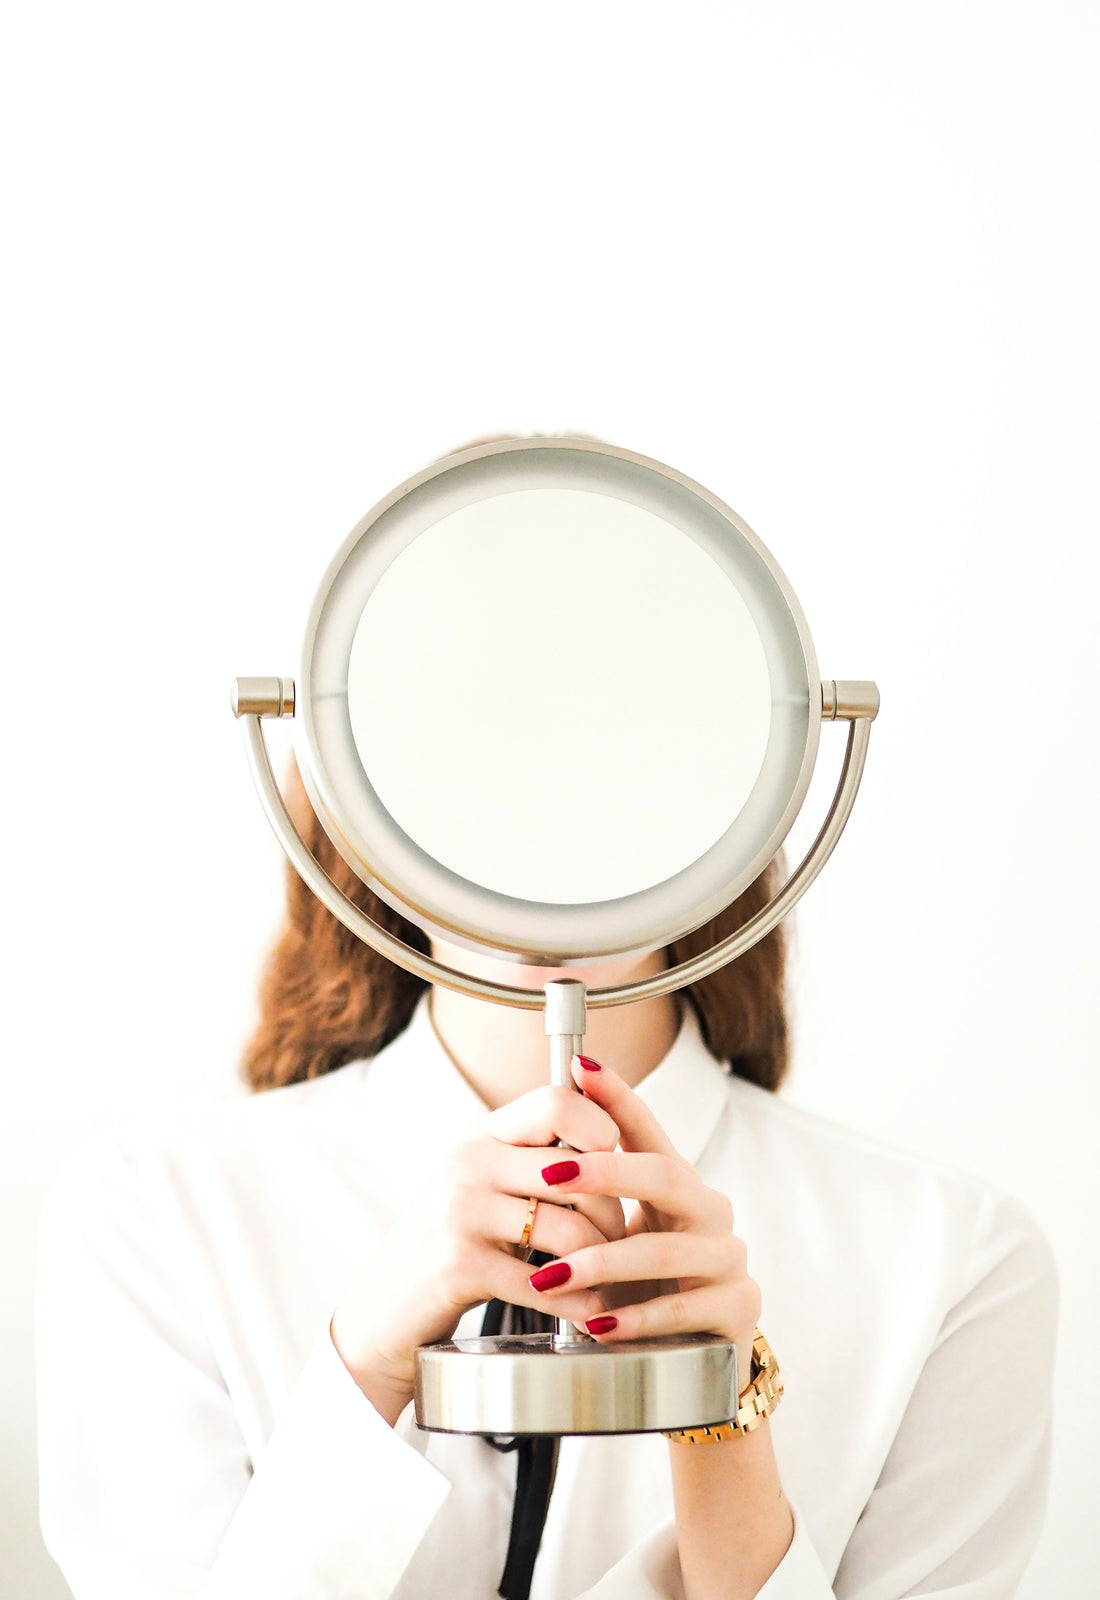 Looking in the mirror is hard – but it’s necessary